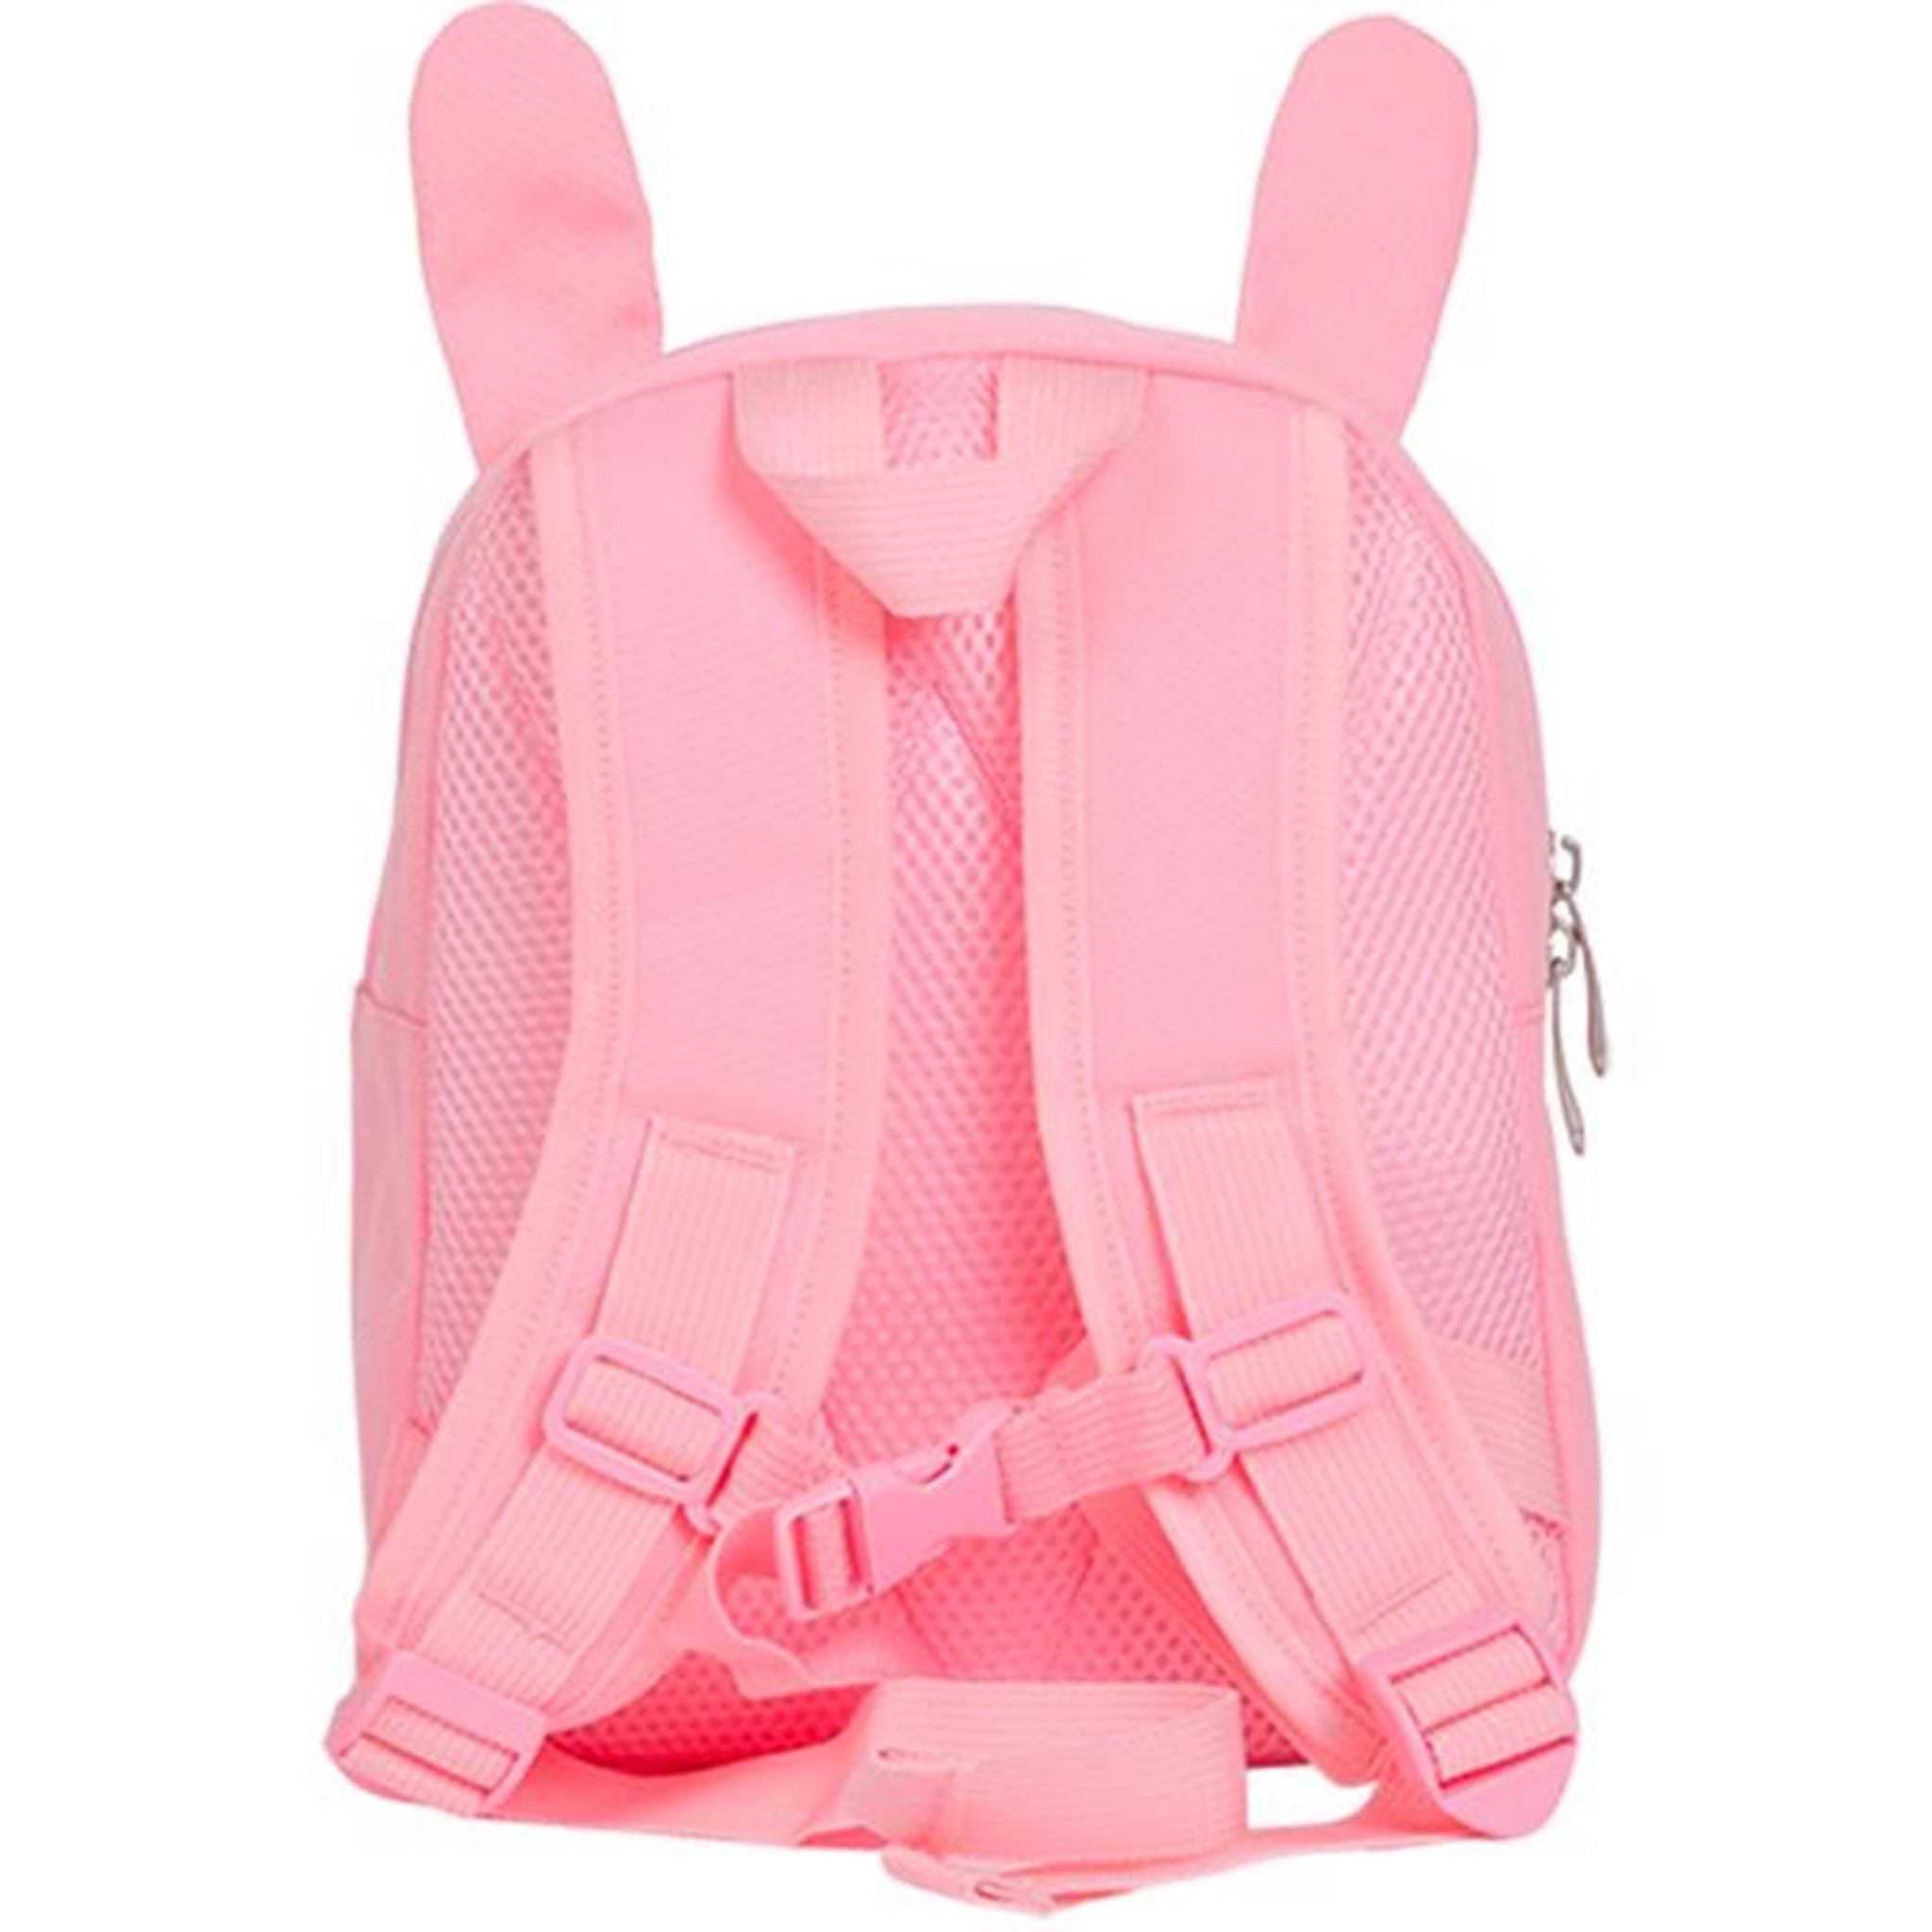 A Little Lovely Company Backpack Bunny 5